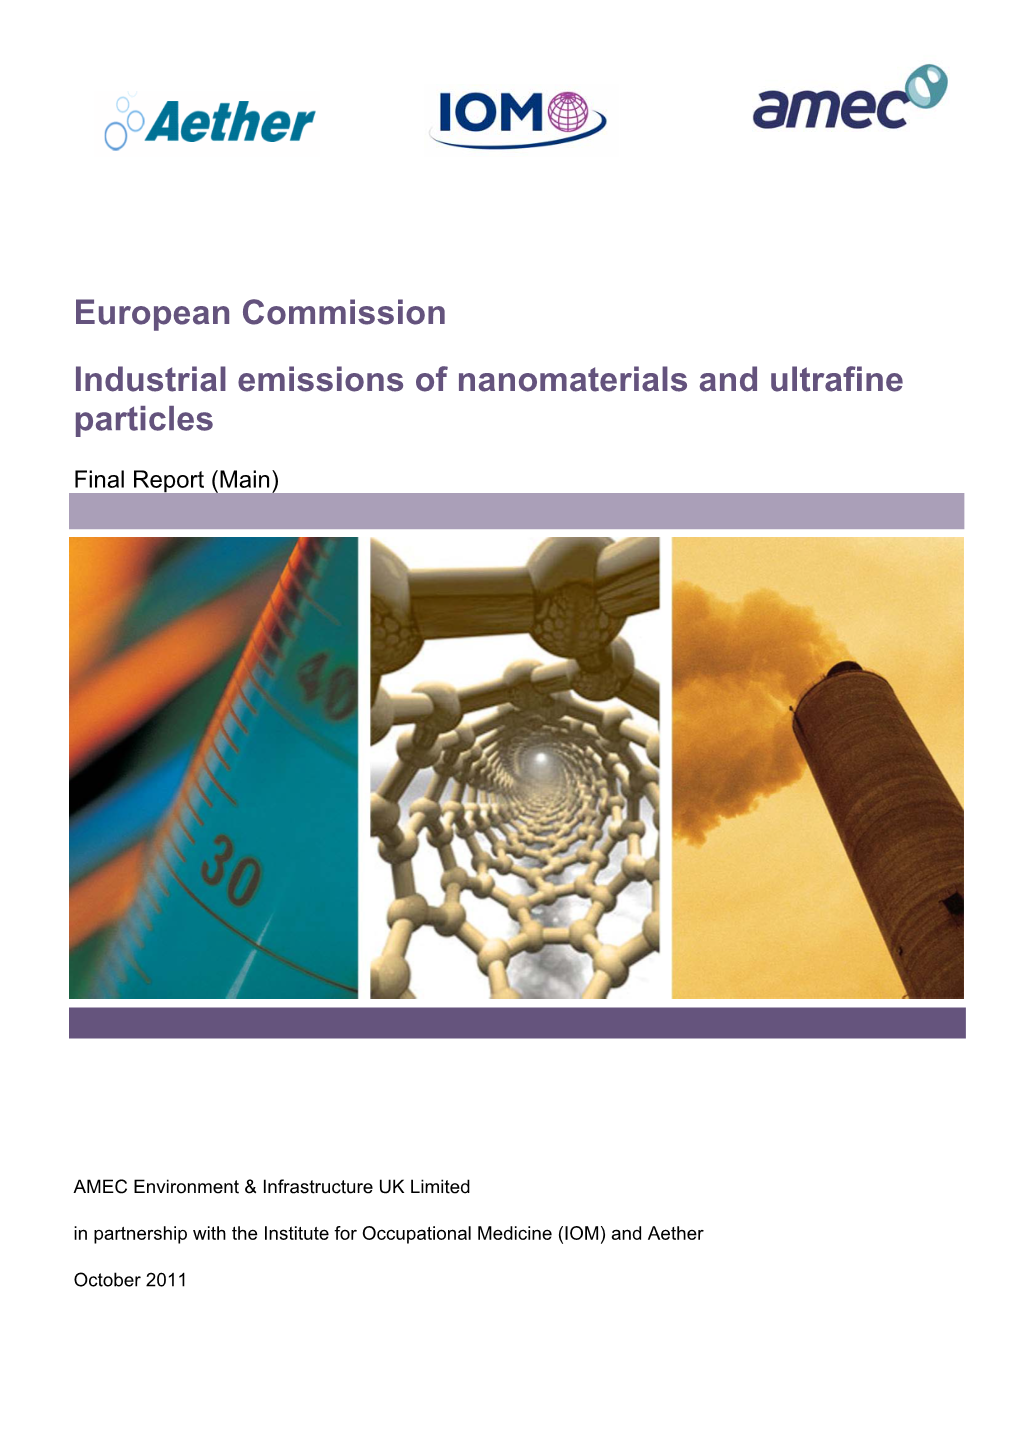 European Commission Industrial Emissions of Nanomaterials and Ultrafine Particles